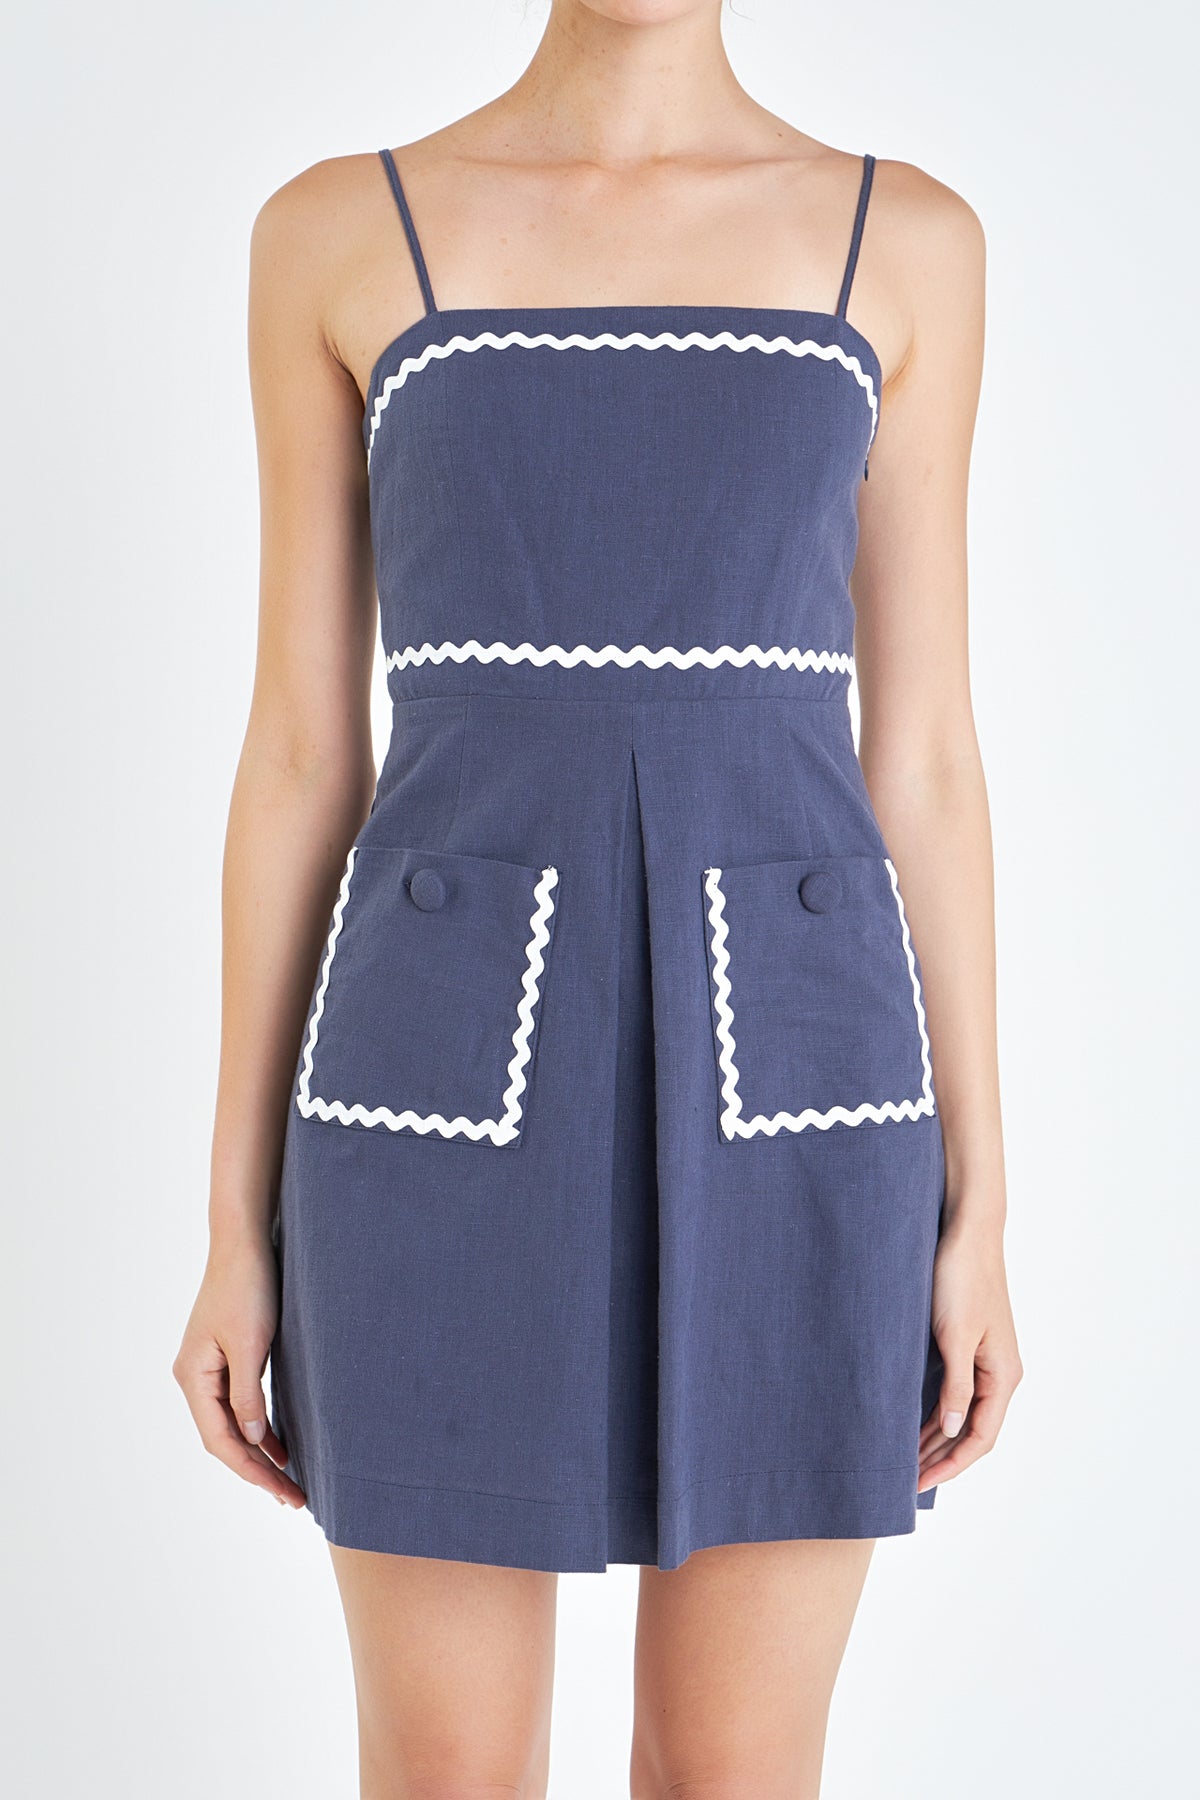 ENGLISH FACTORY - Linen Mini Dress w/ Ric Rac Trim - DRESSES available at Objectrare